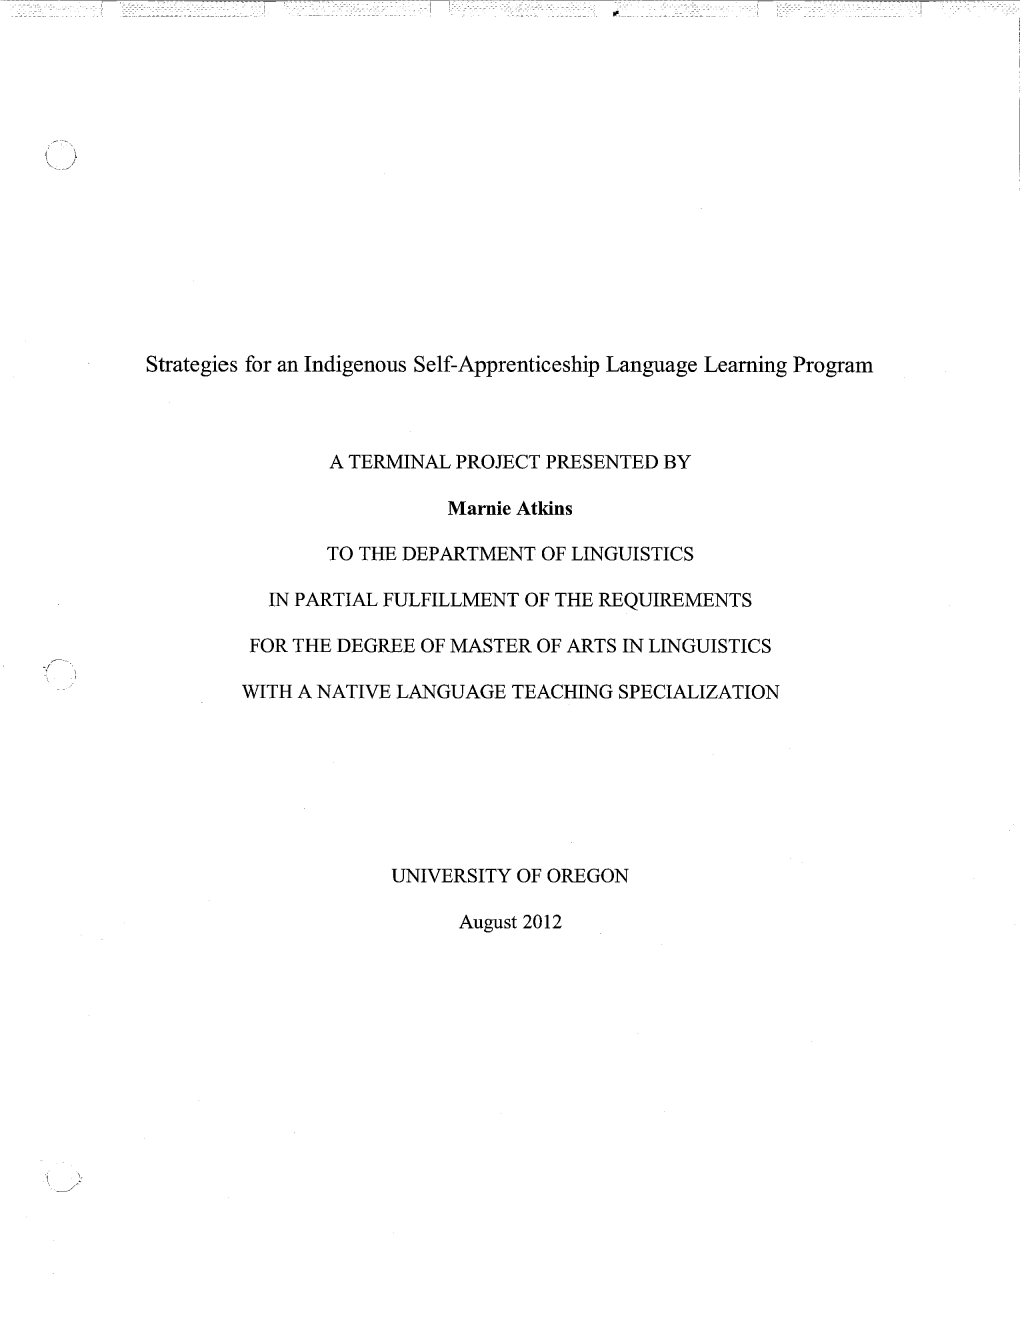 Strategies for an Indigenous Self-Apprenticeship Language Learning Program